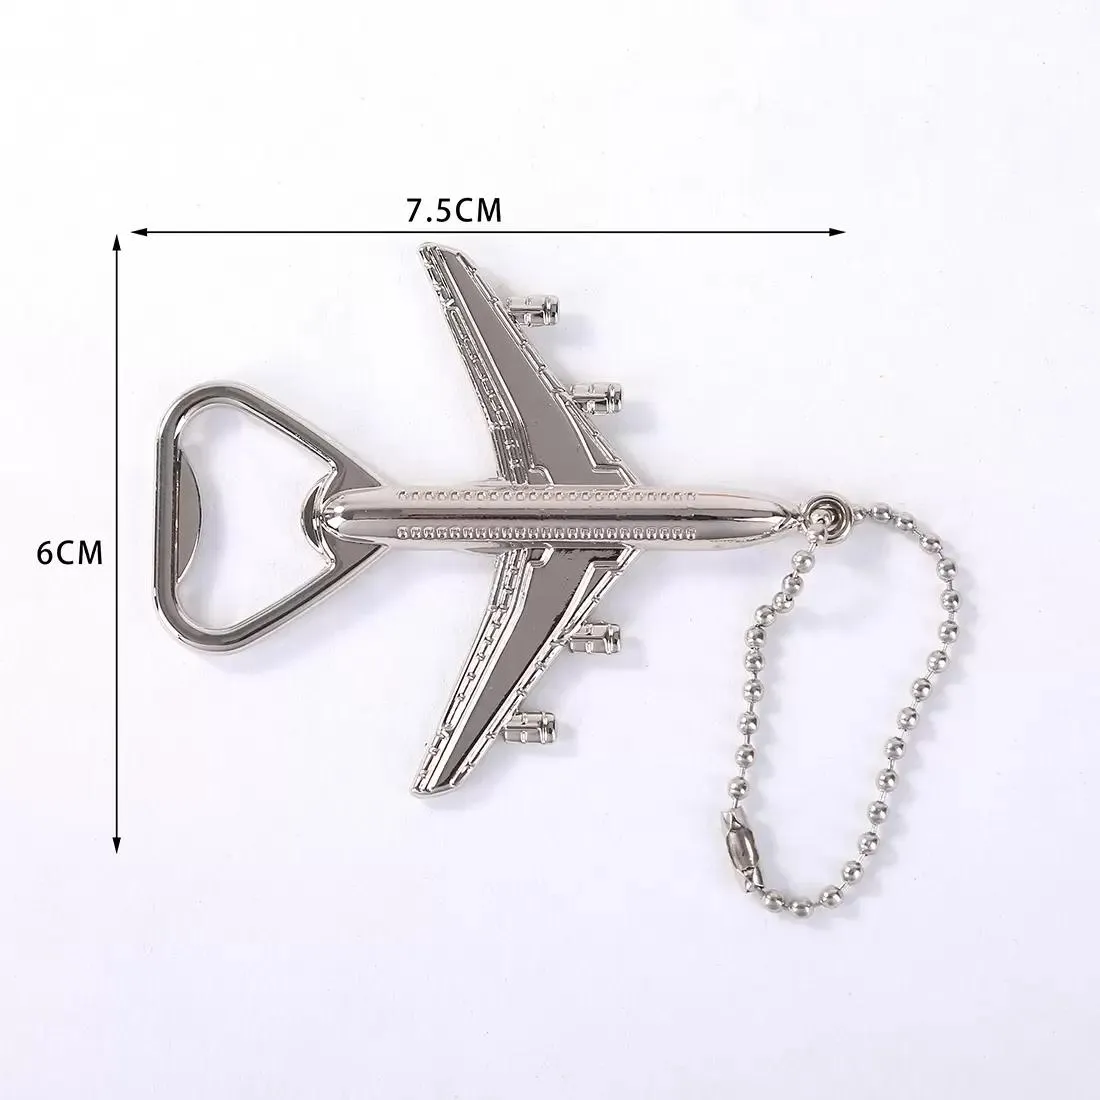 Retro Airplane Beer Bottle Opener Aircraft Keychain Alloy Plane Shape Opener Keyring Wedding Gift Party Favors Kitchen Tools GGA2720